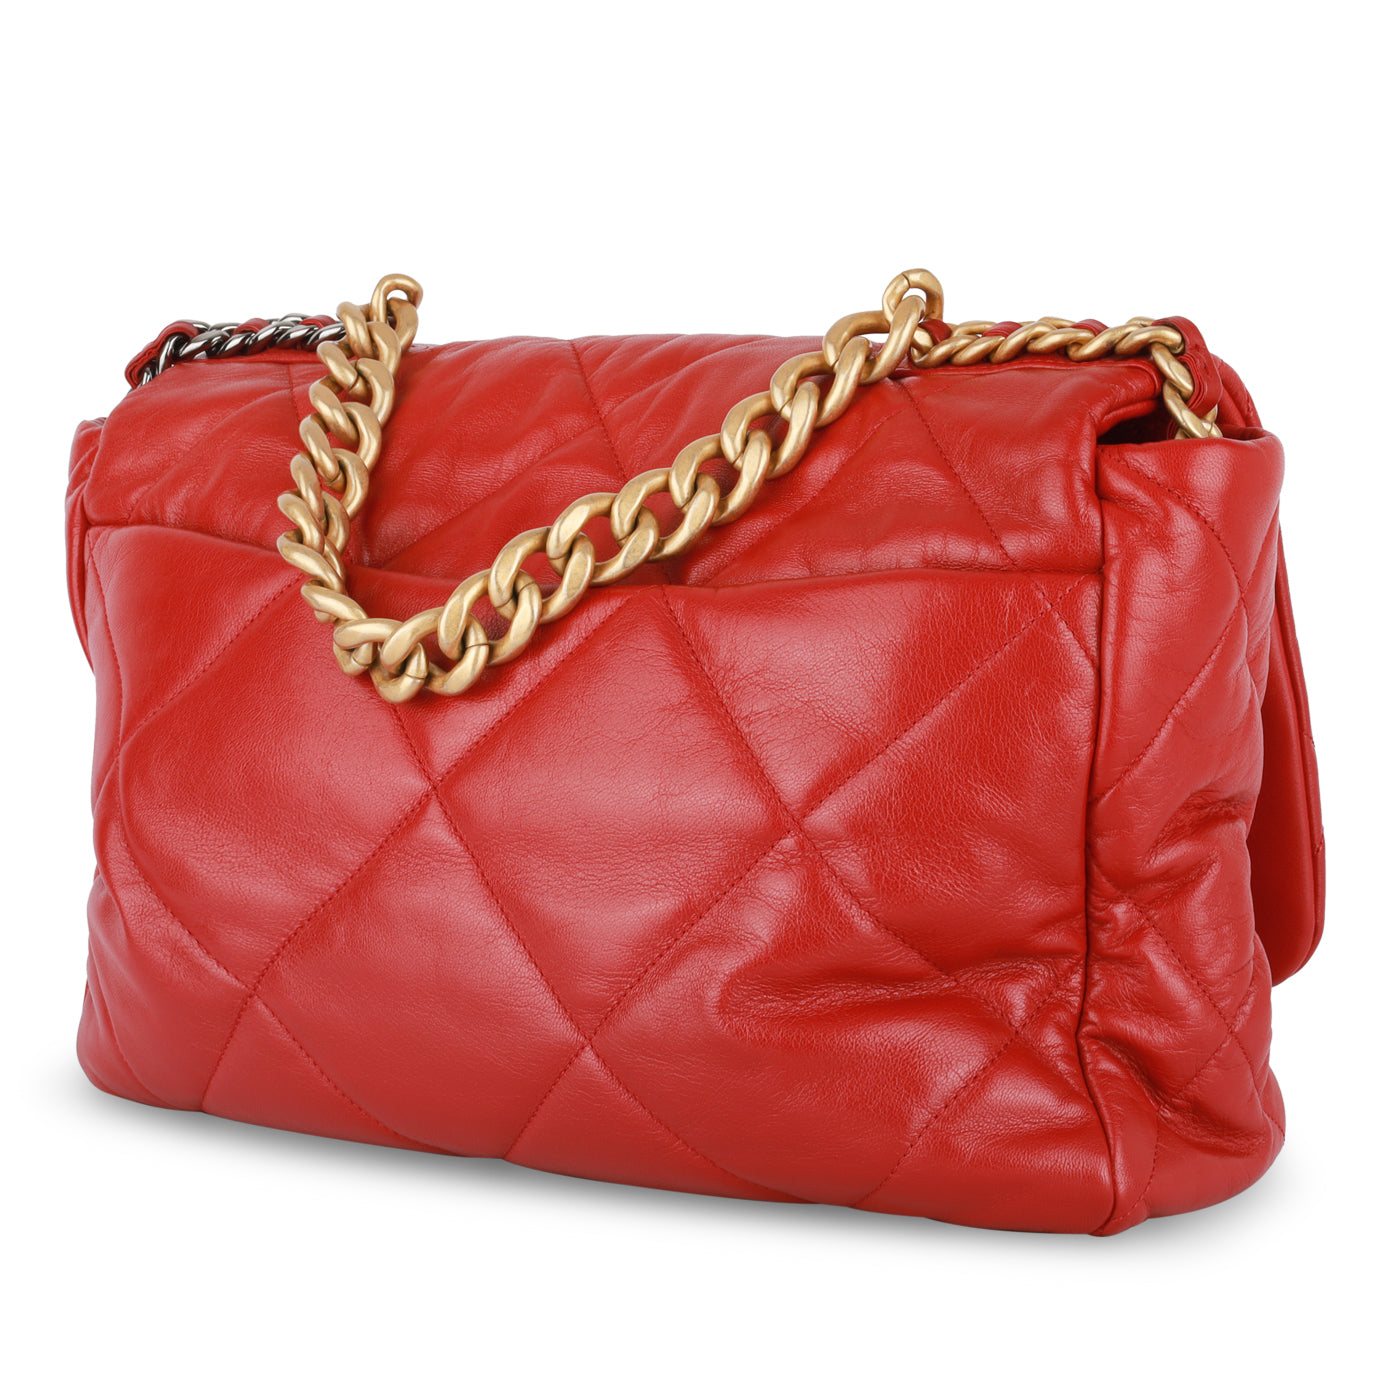 CHANEL CHANEL 19 Small Flap Bag in Red Goatskin